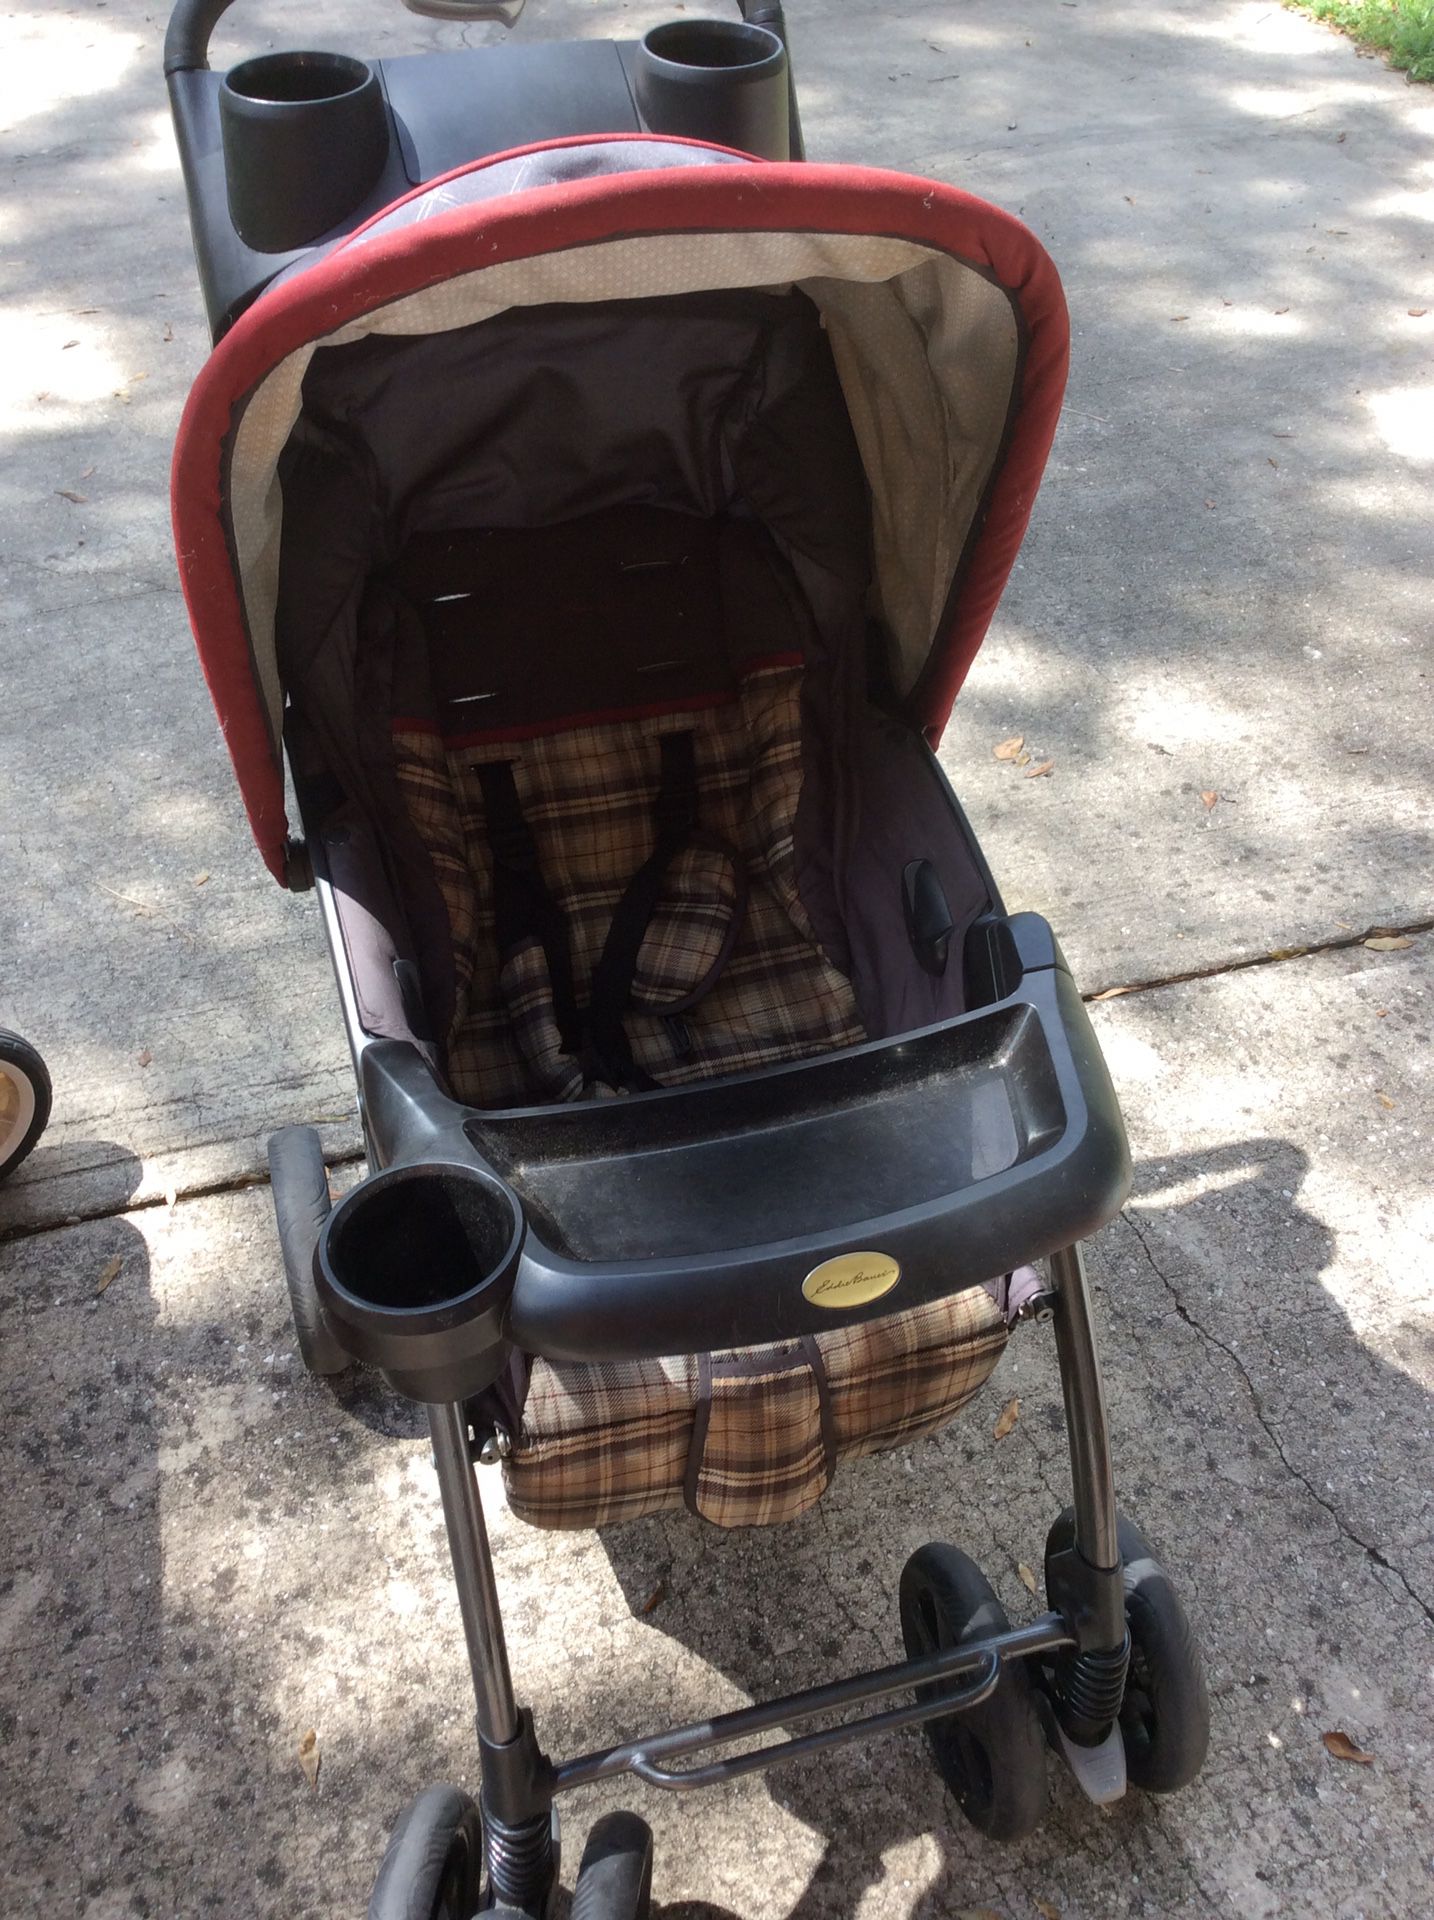 EDDIE BAUER STROLLER AND RADIO FLYER WITH HOOD FOR SALE